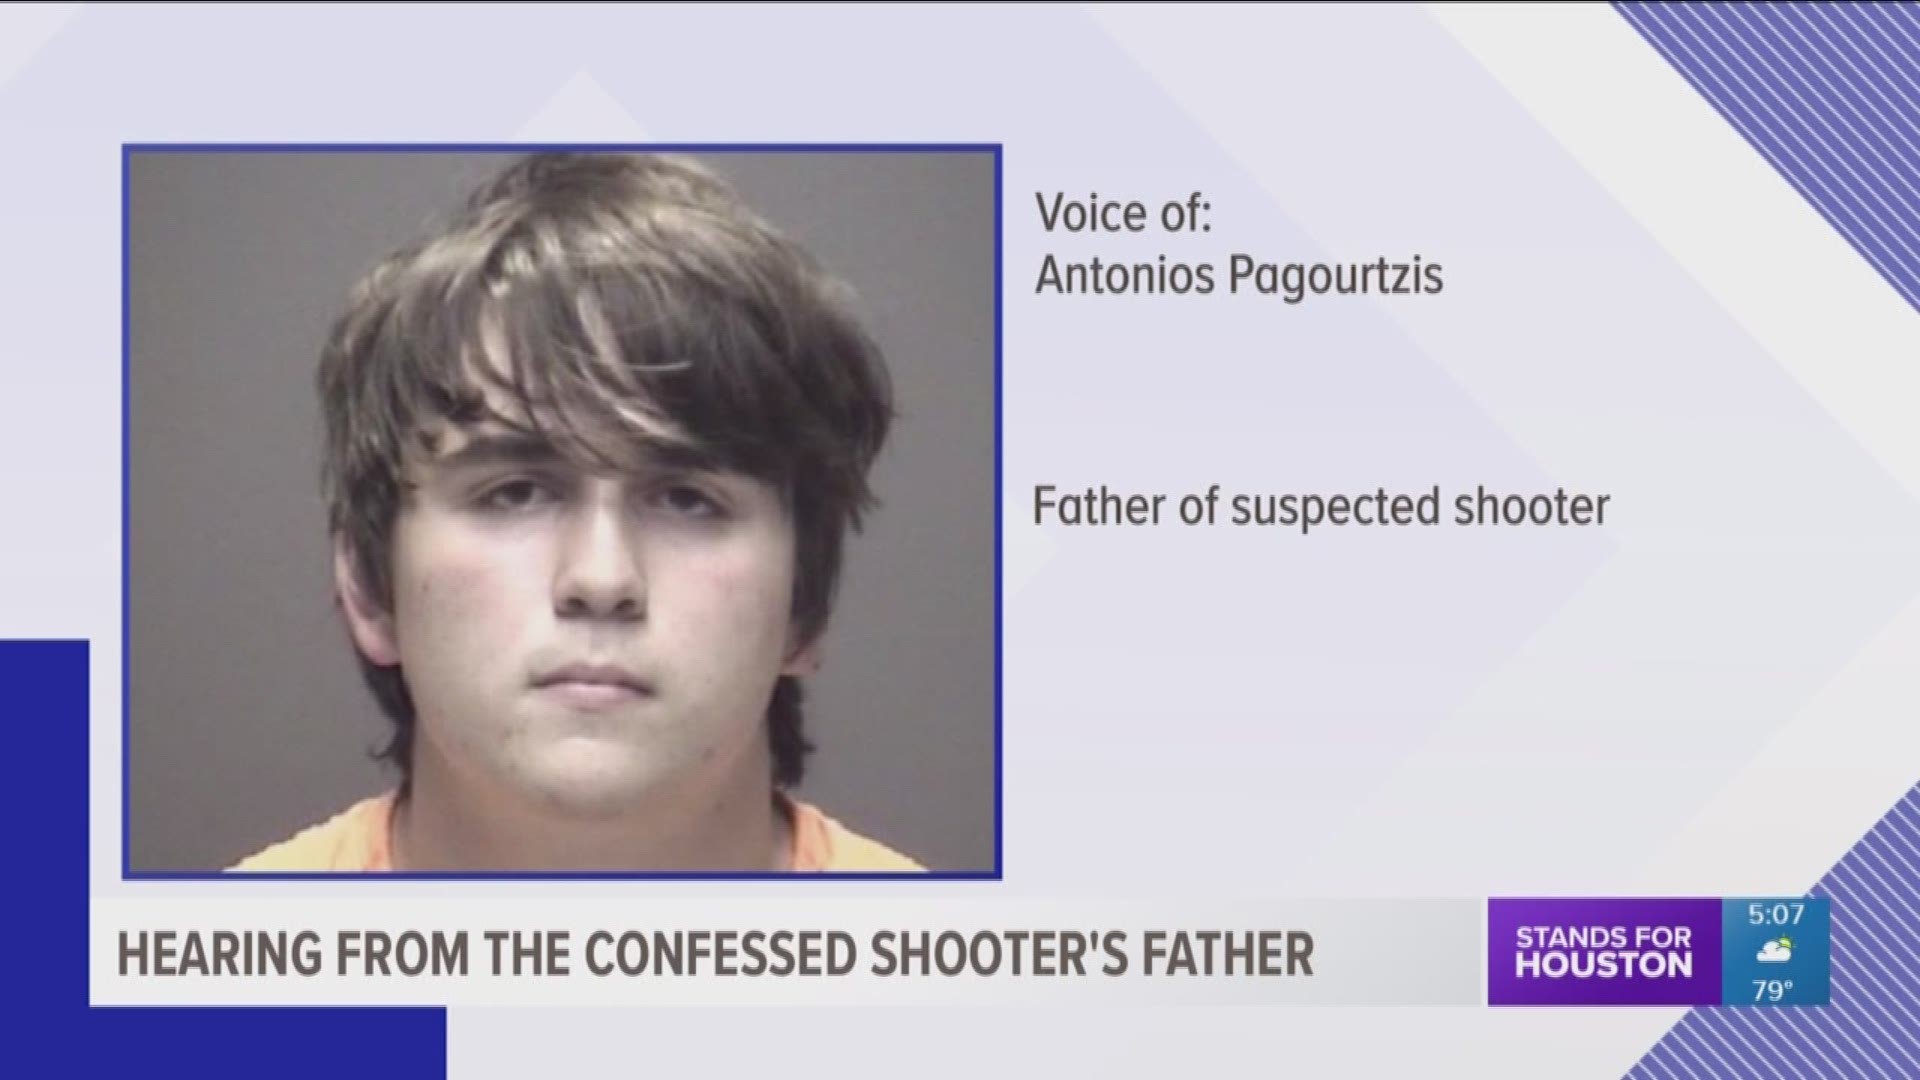 Antonio Pagourtzis says he has the "same exact pain" as the parents of the victims of the Santa Fe High School shooting. Pagourtzis called his son, Dimitrious, a "good boy" and "a victim."